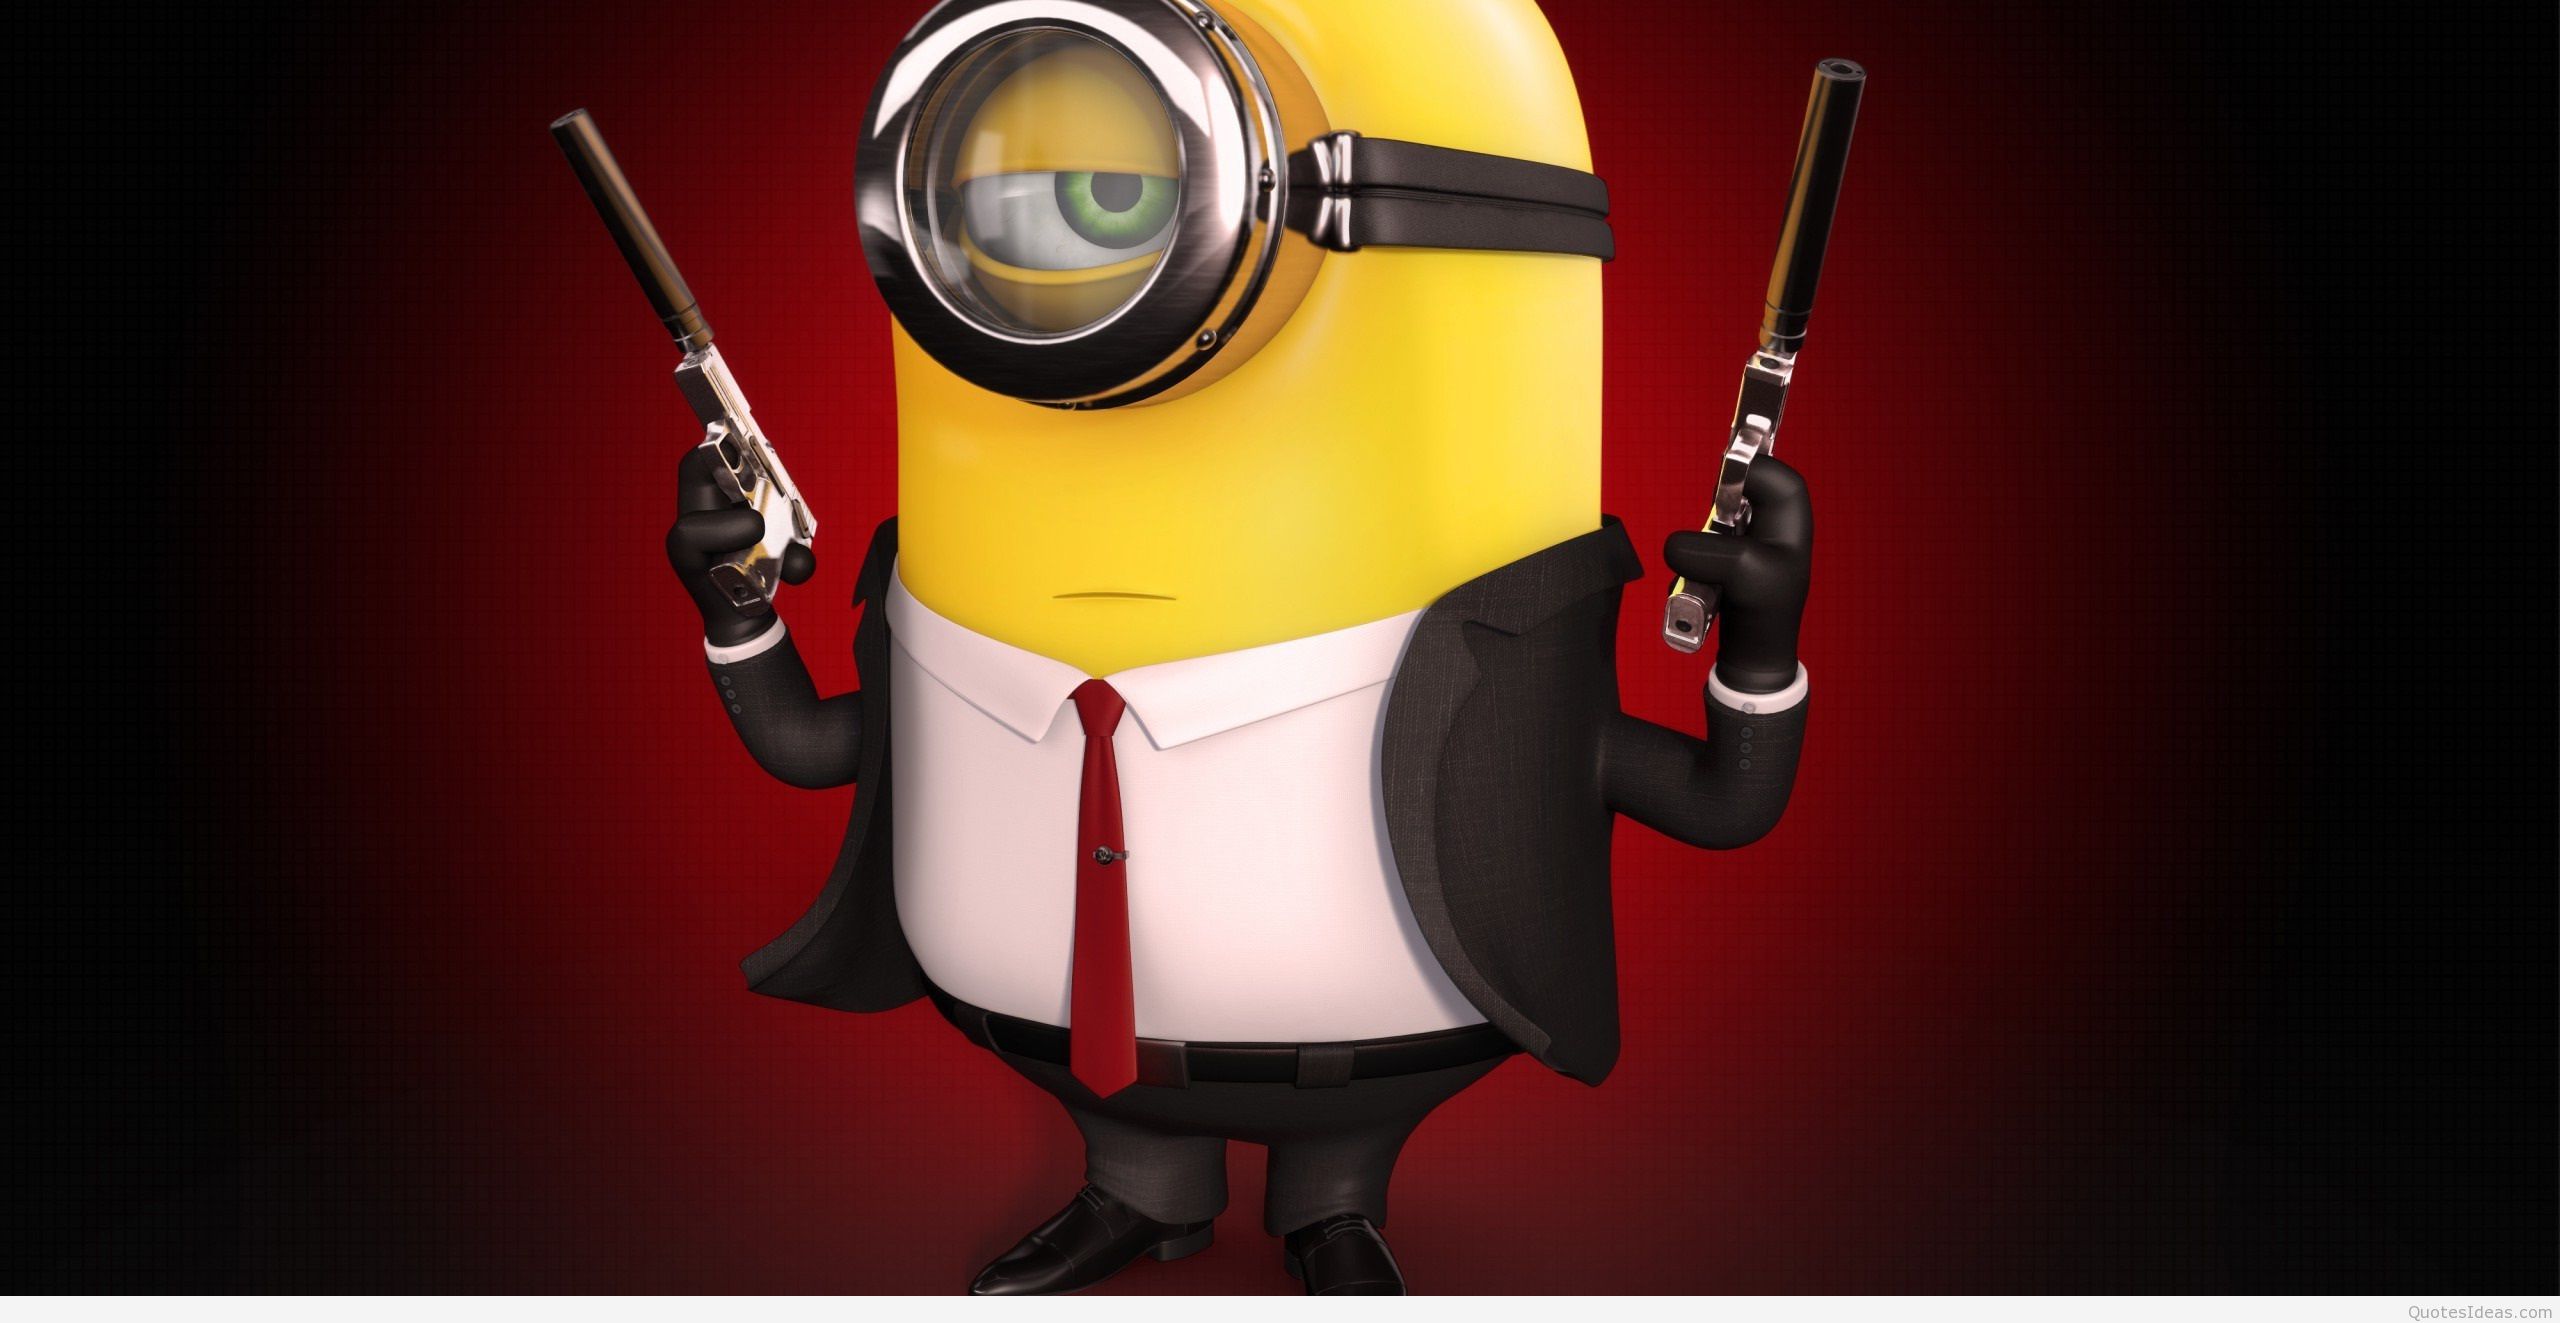 Funny mobile wallpapers with minions 2015 2016